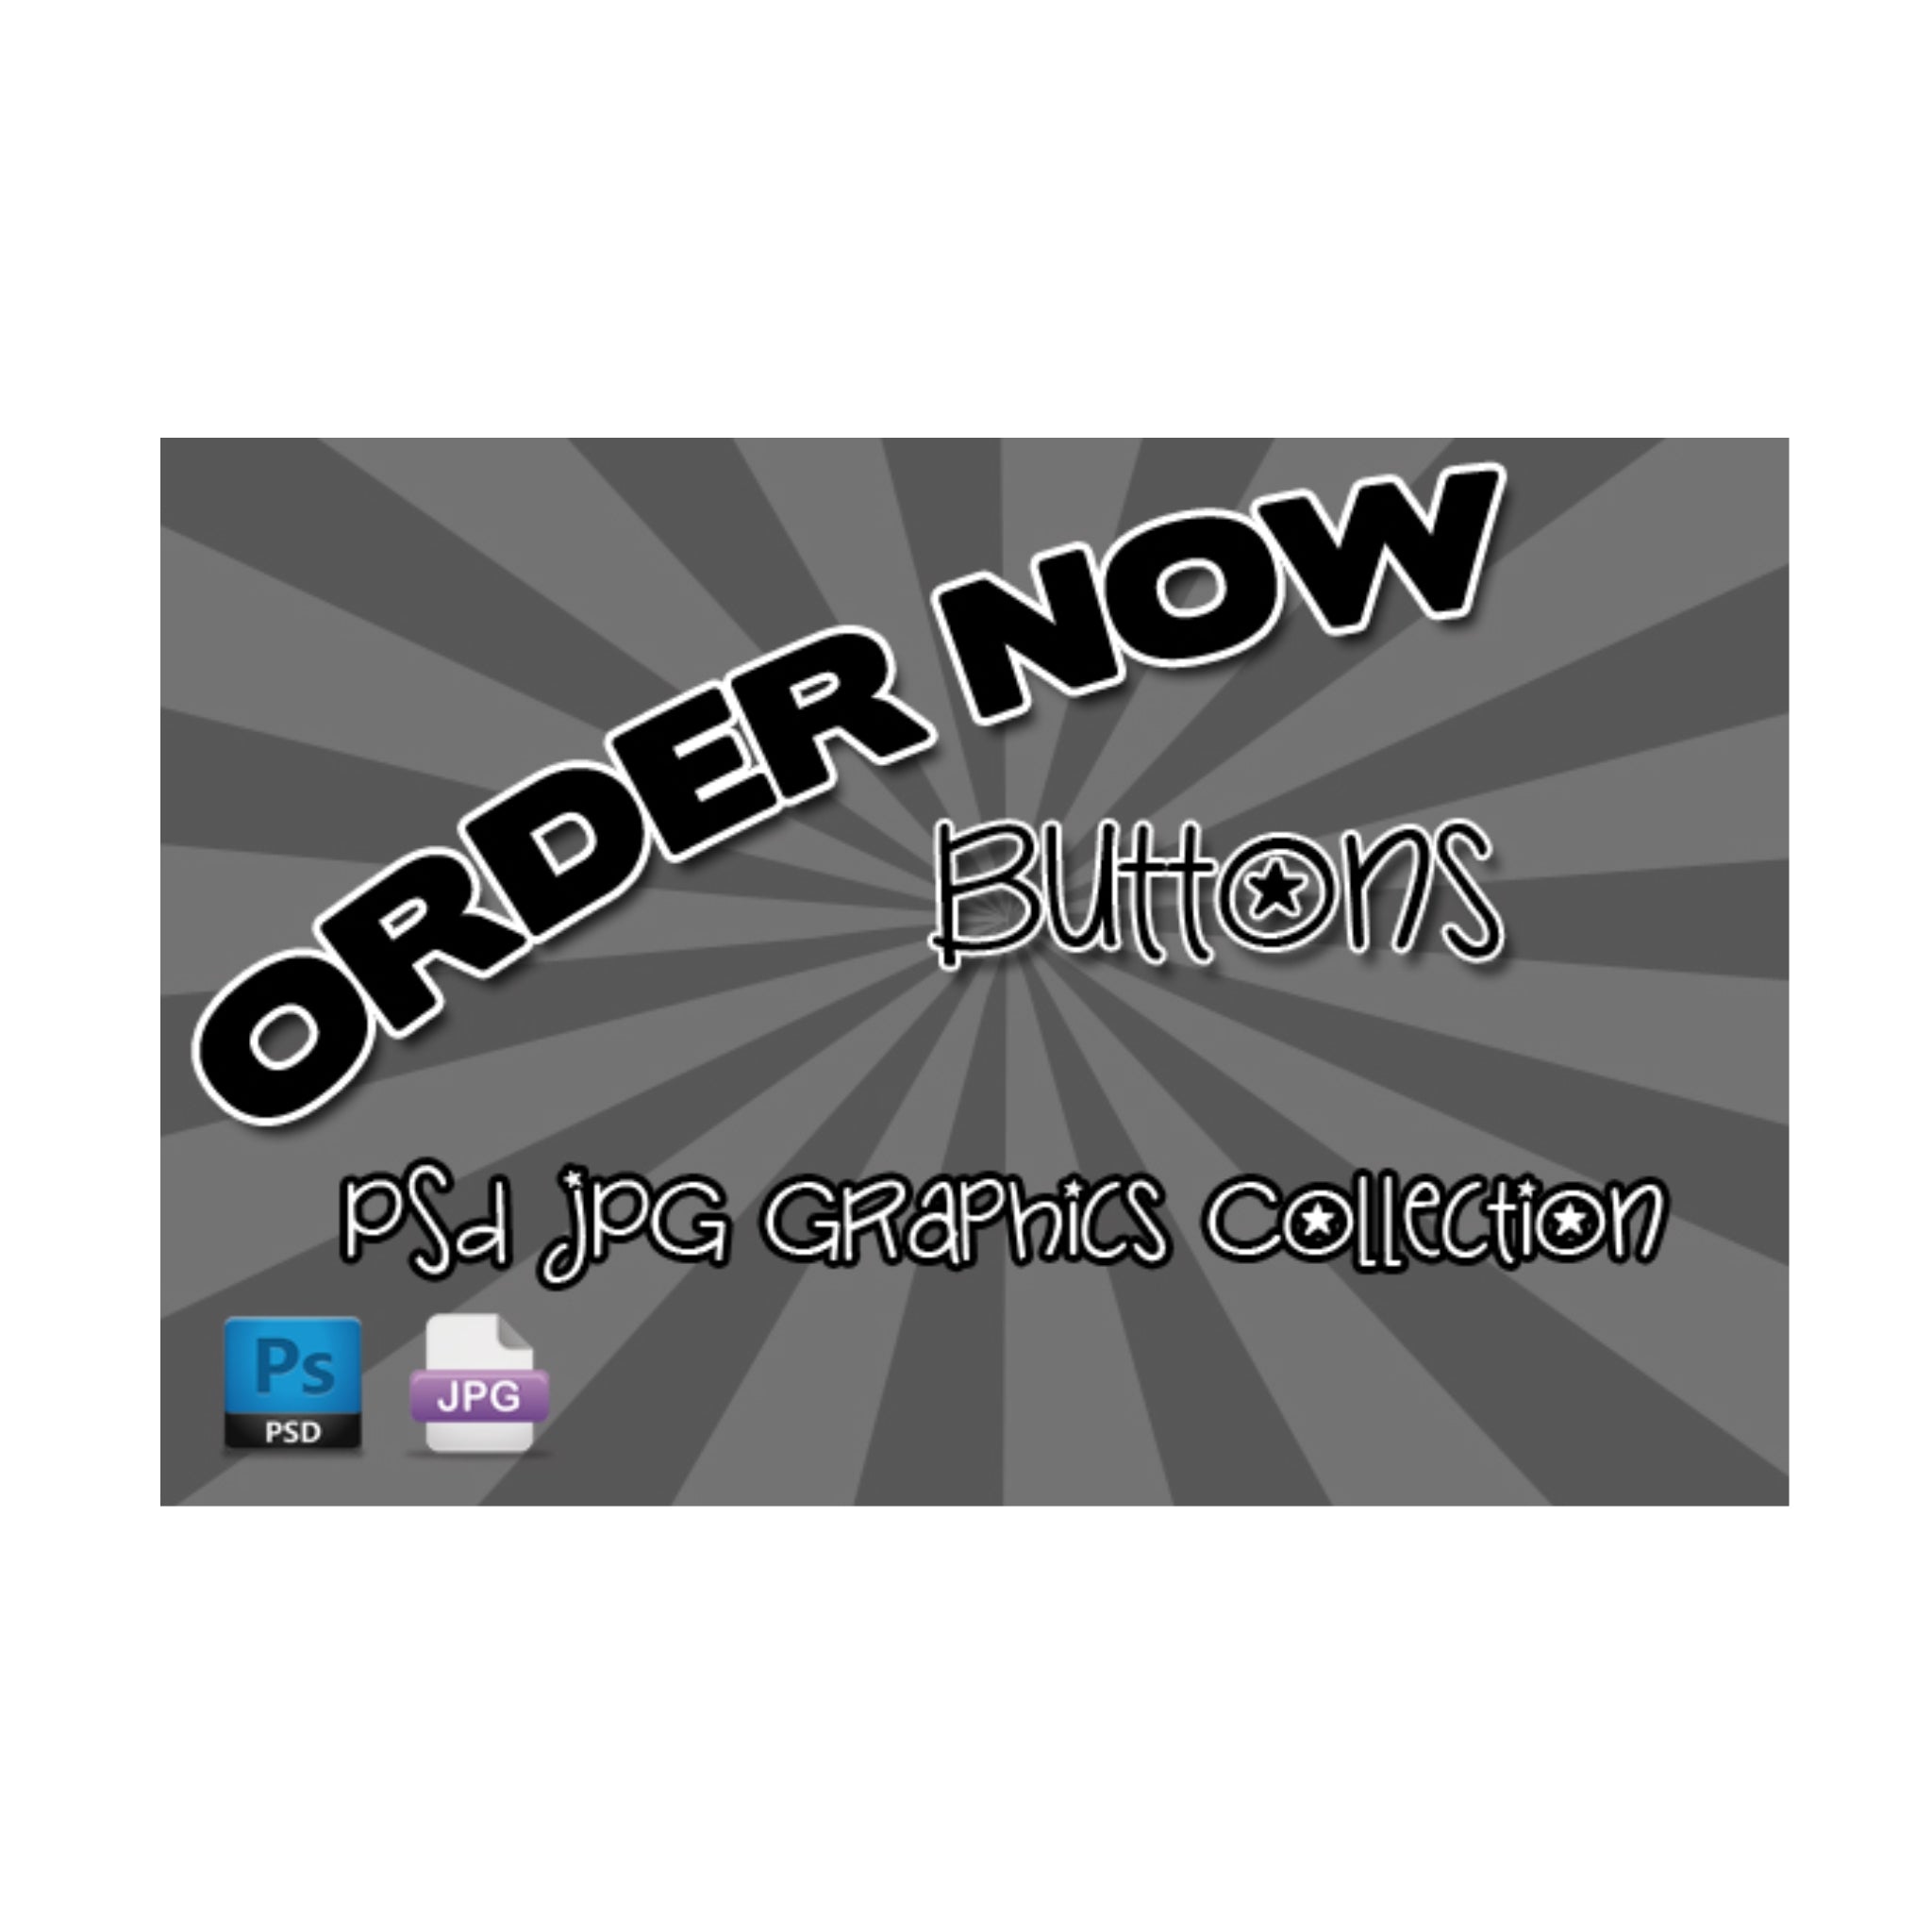 Order Now Buttons PSD JPG Graphics Collection Ebook